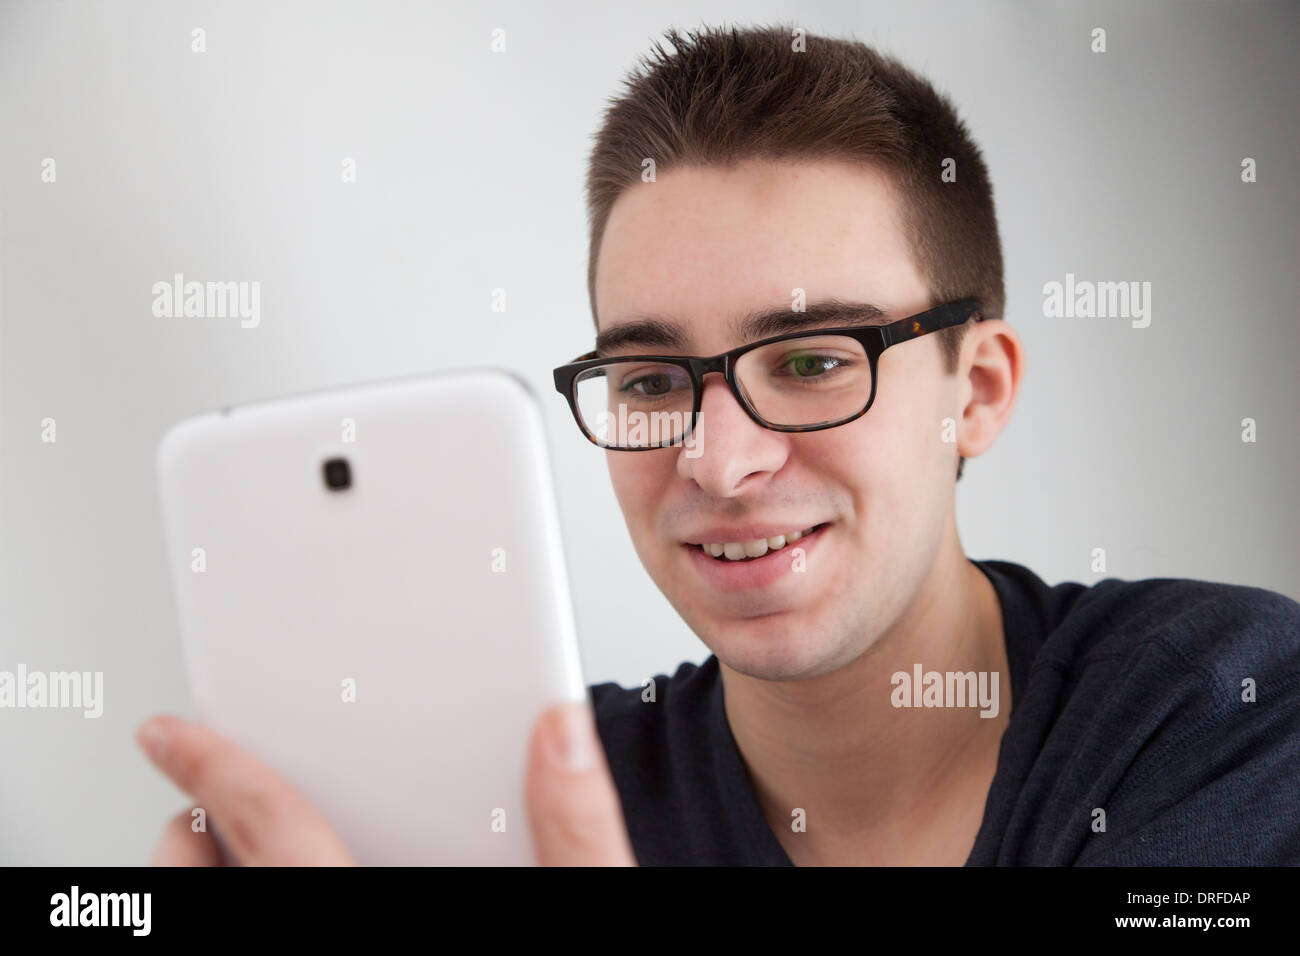 Good looking young man wearing glasses, smiling while holding a white digital tablet. Stock Photo